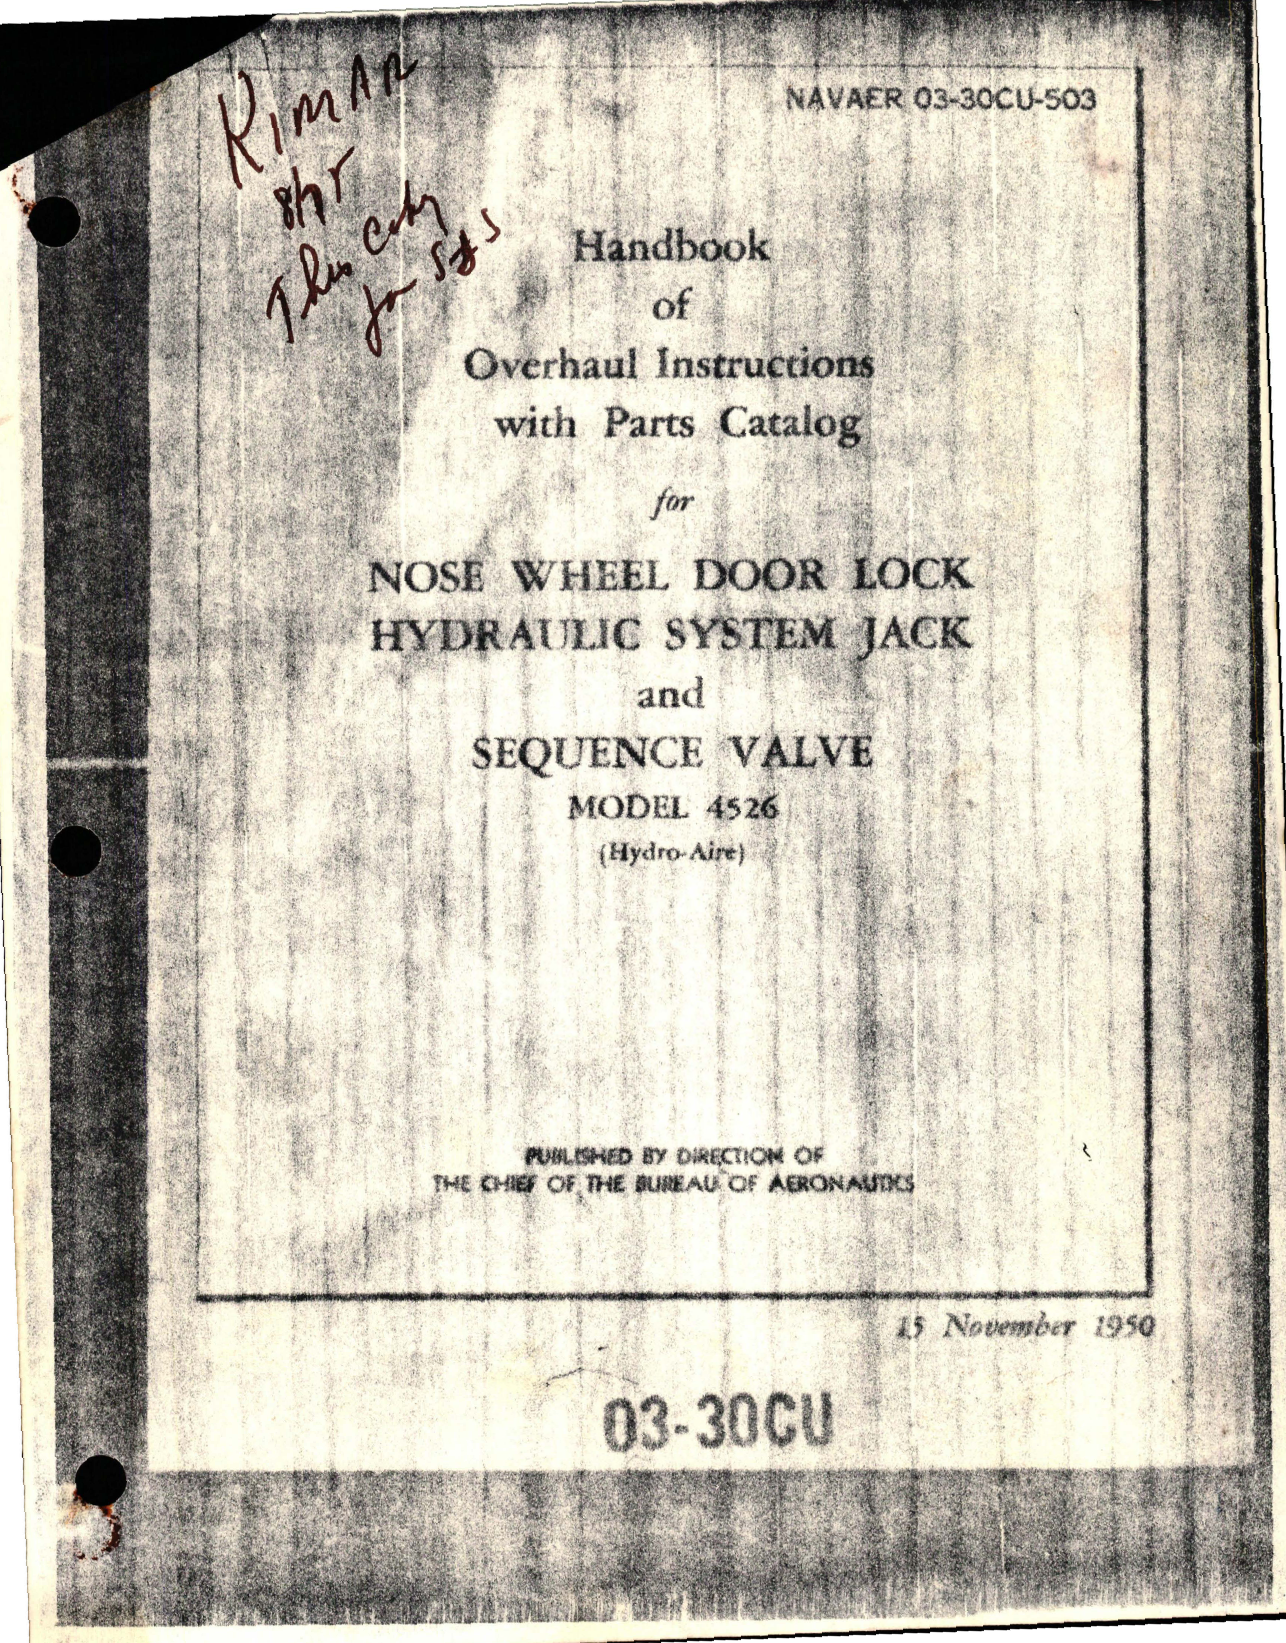 Sample page 1 from AirCorps Library document: Overhaul Instructions with Parts Catalog for Nose Wheel Door Lock Hydraulic System Jack & Sequence Valve - Model 4526